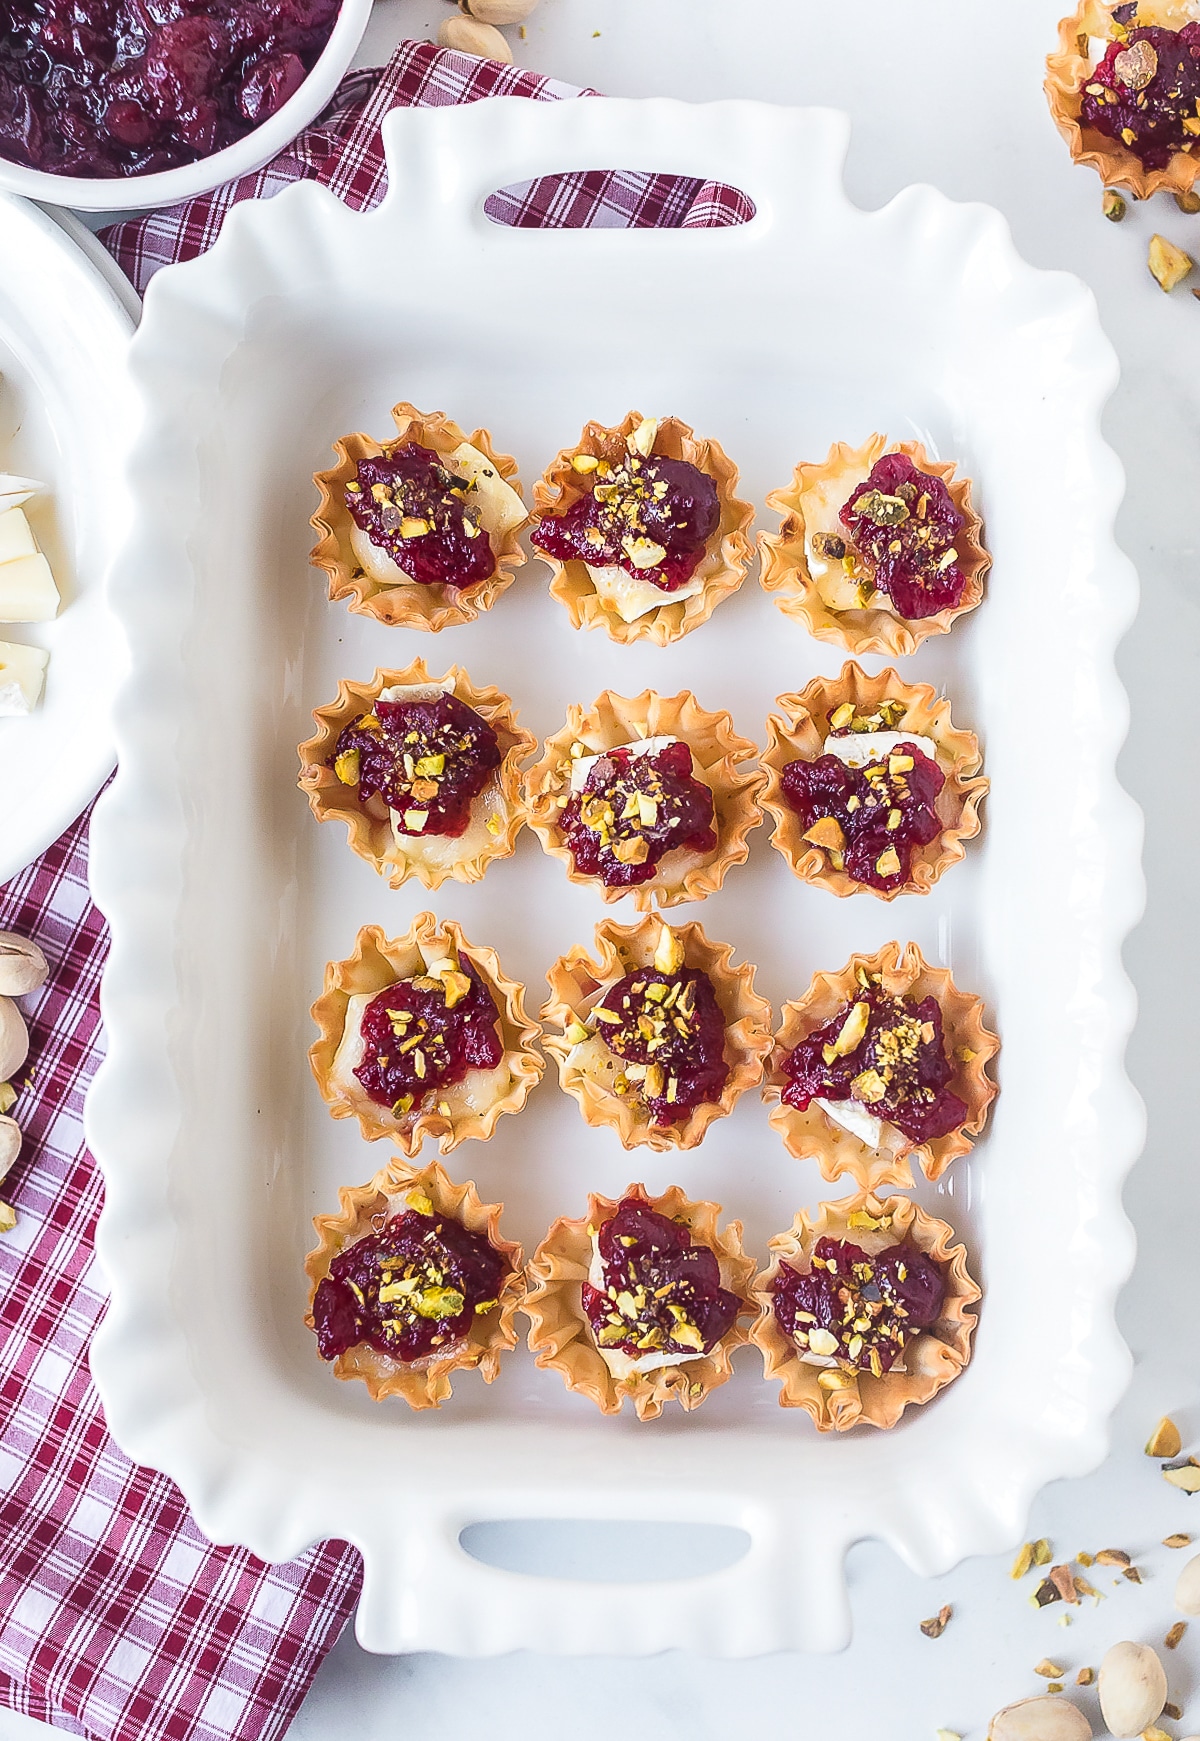 Baked Brie Bites Recipe with Cranberry Sauce #ASpicyPerspective #brie #baked #cranberry 